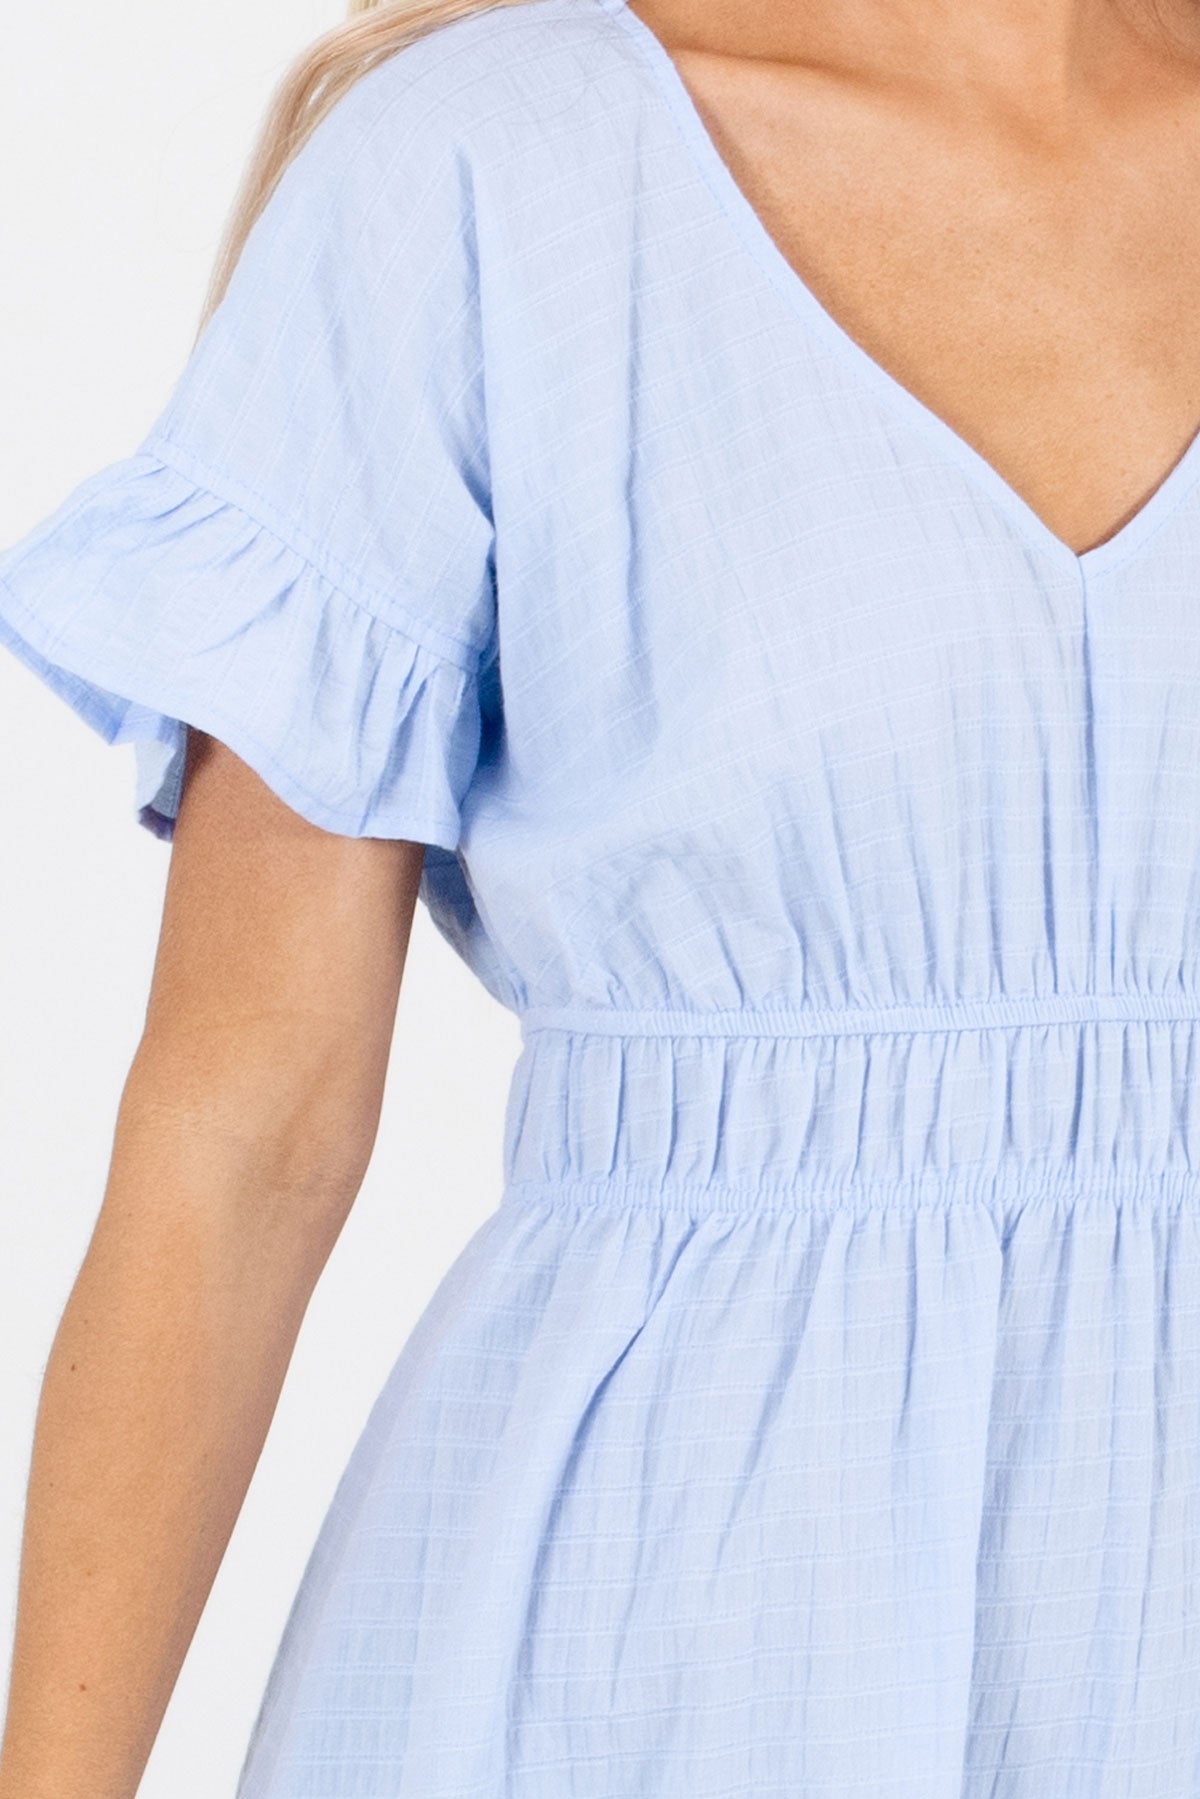 Light Blue Affordable Online Boutique Clothing for Women